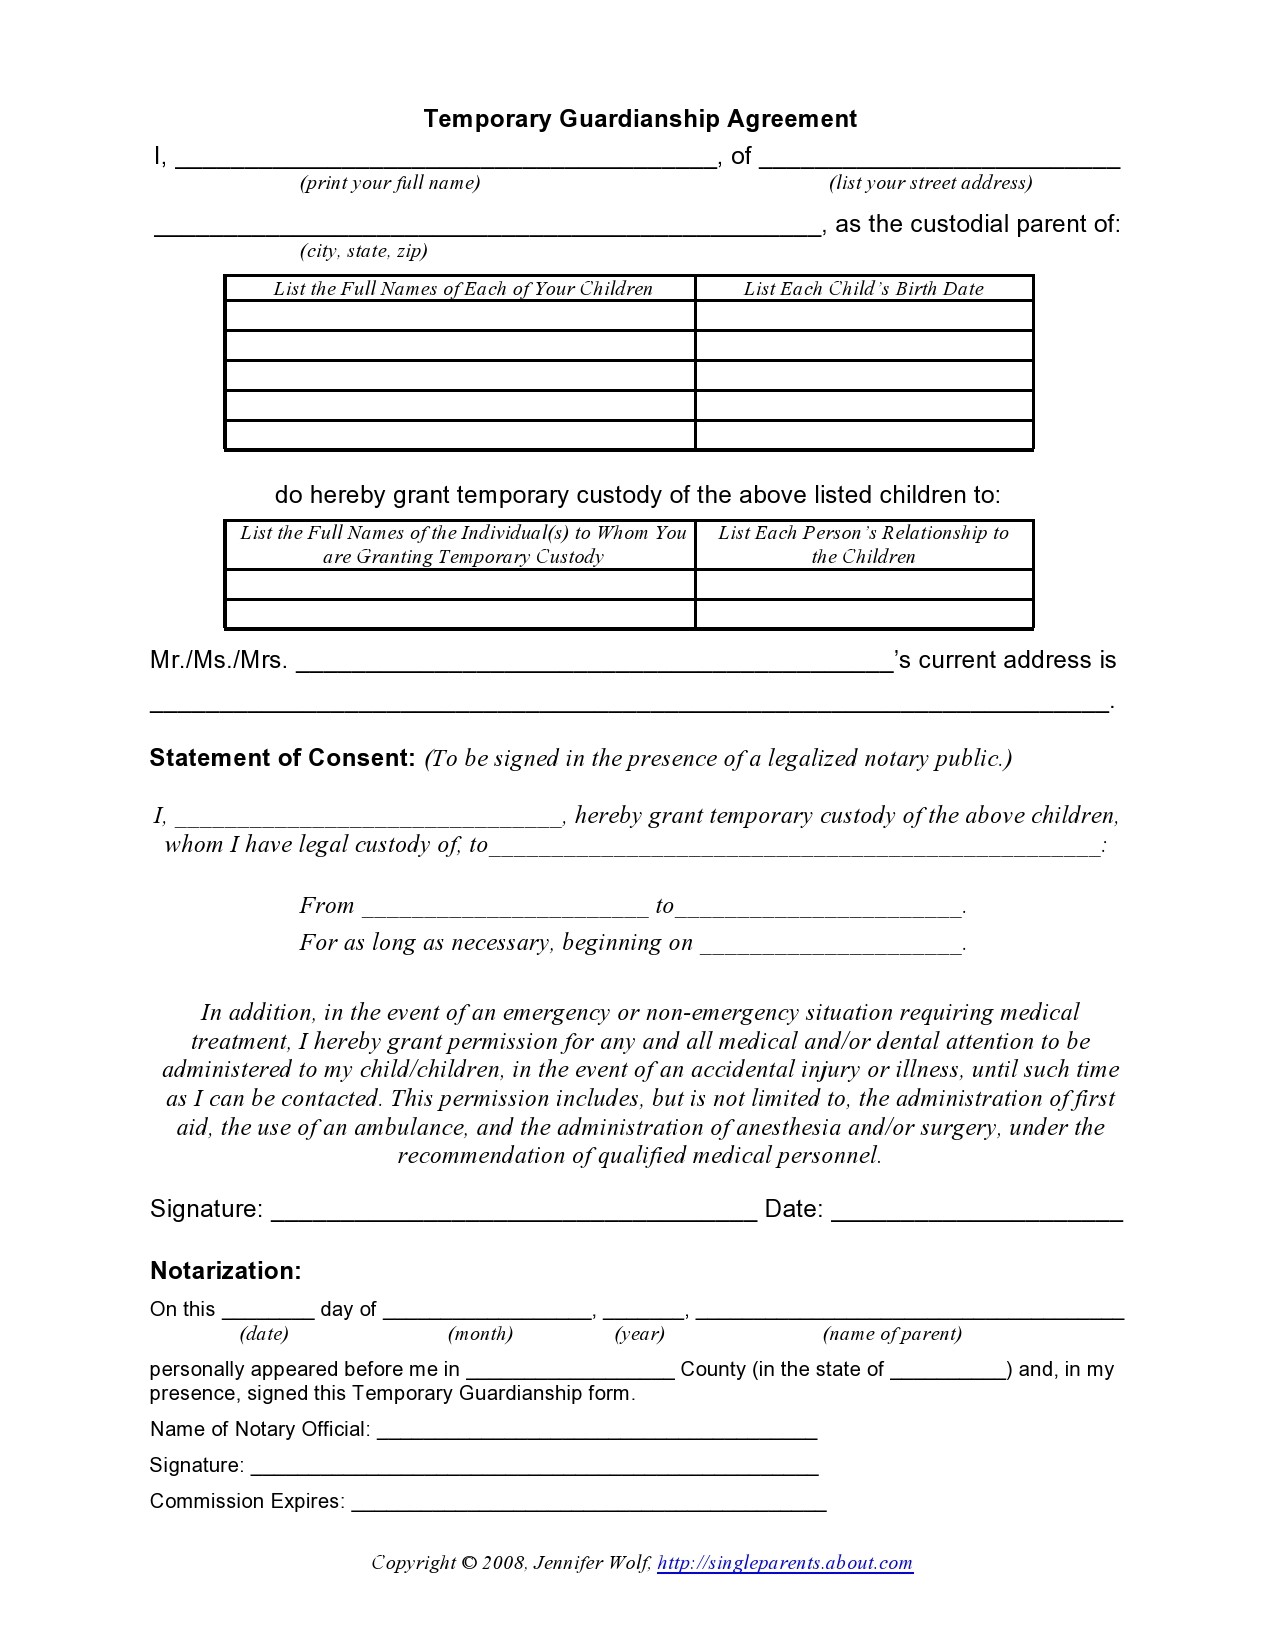 50 Free Guardianship Forms Temporary Permanent Templatelab Porn Sex Picture 5099